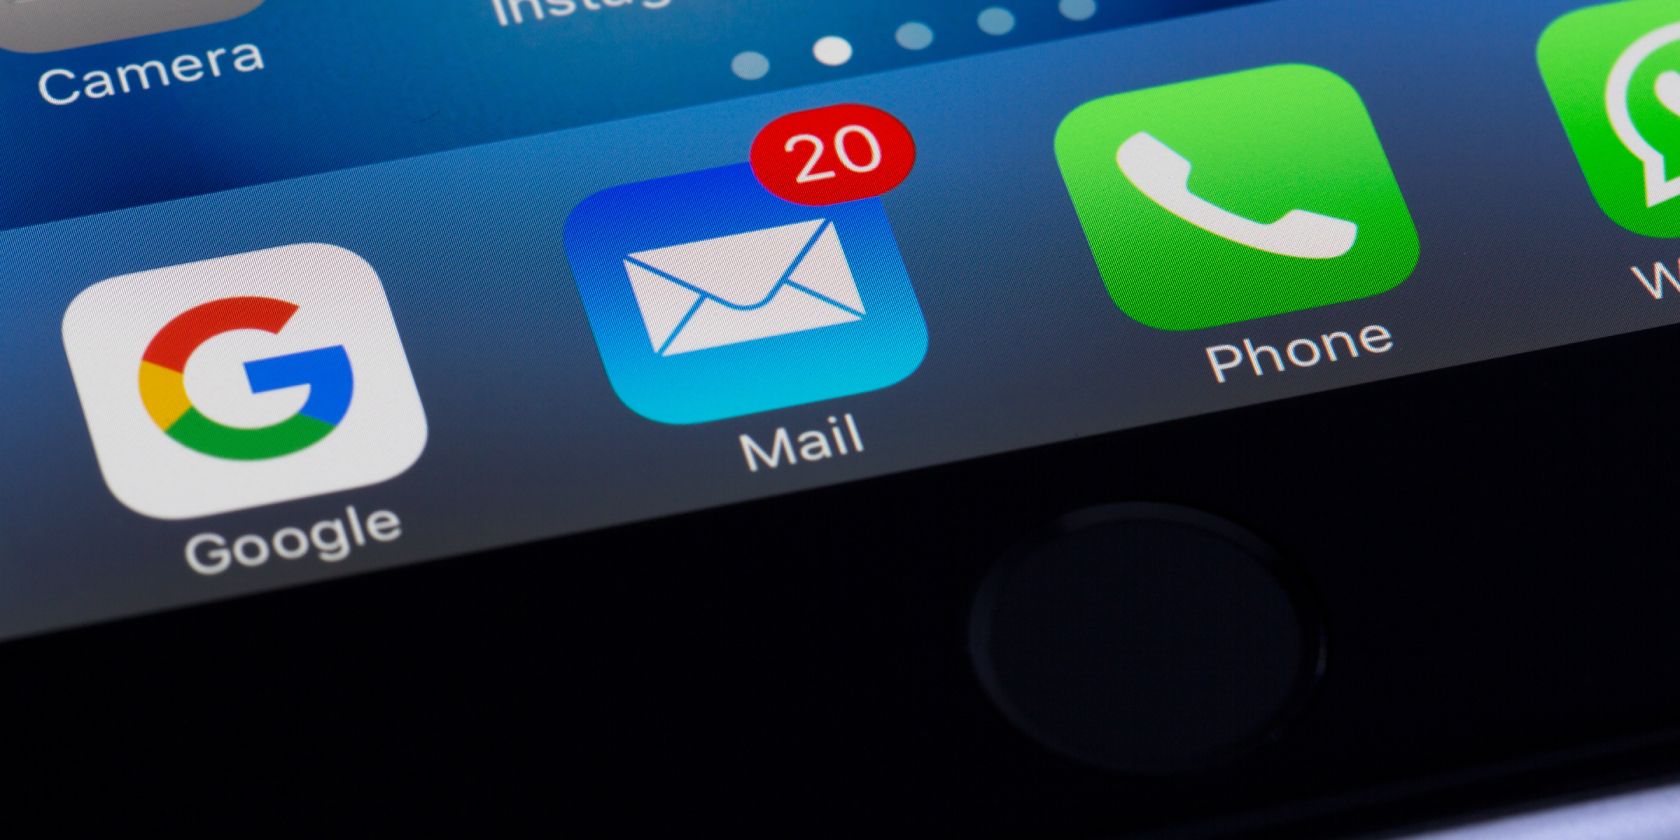 Close-up picture of an iPhone highlighting the Mail app